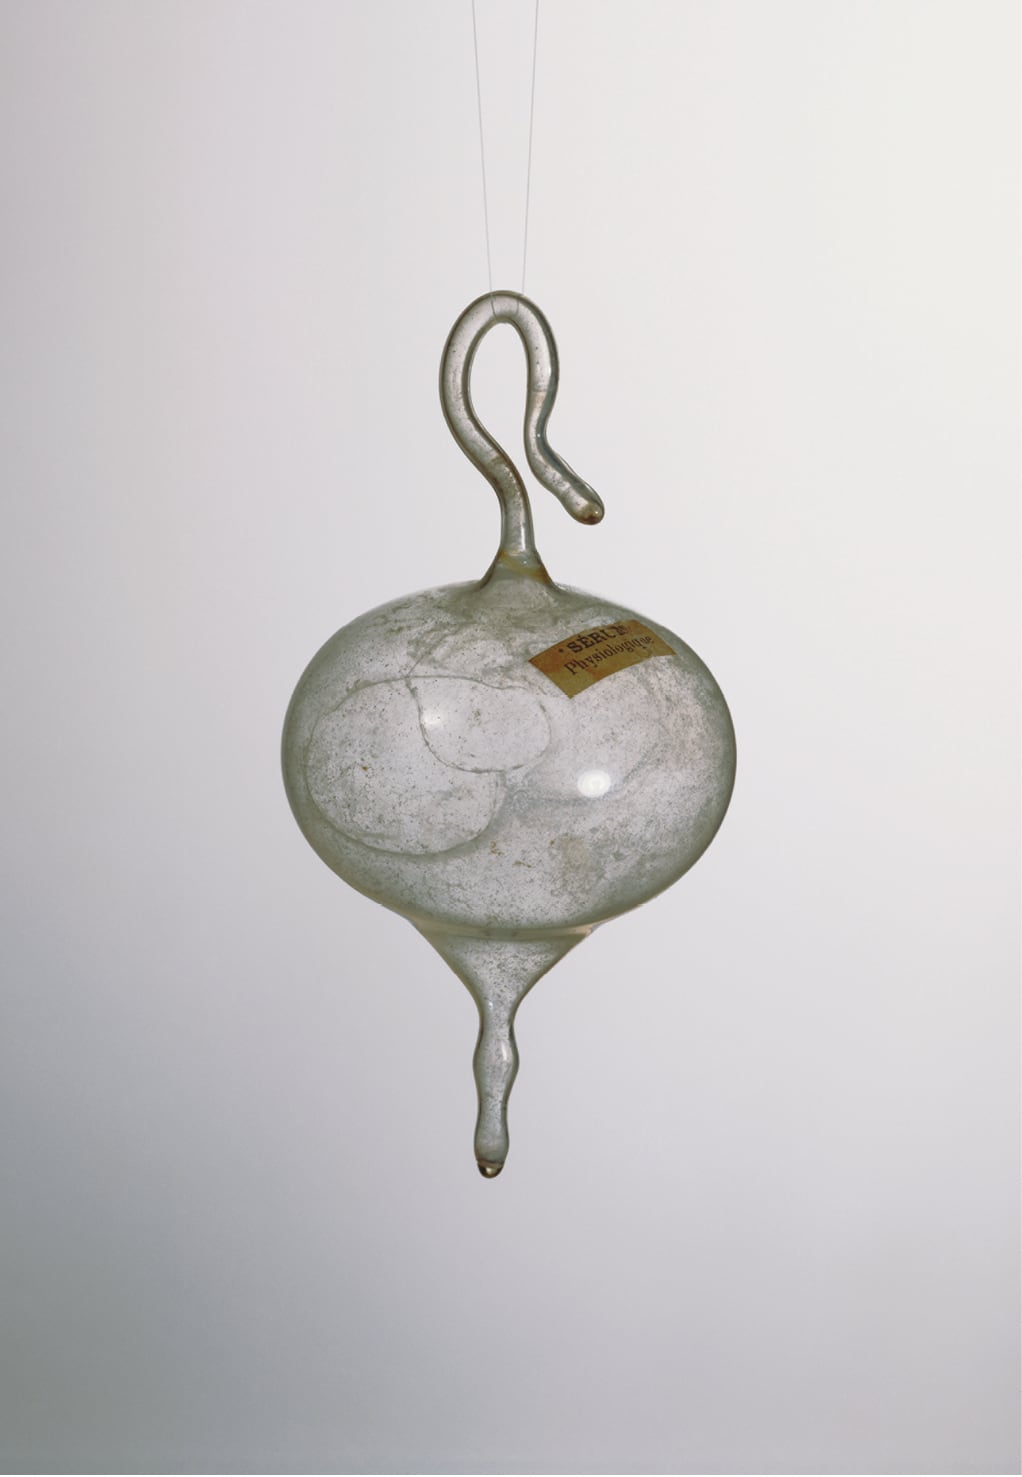 Marcel Duchamp, <em>50 cc of Paris Air</em>, glass ampoule (broken and later restored), 1919. Height: 13.3 cm., The Louise and Walter Arensberg Collection, 1950. Image courtesy Philadelphia Museum of Art